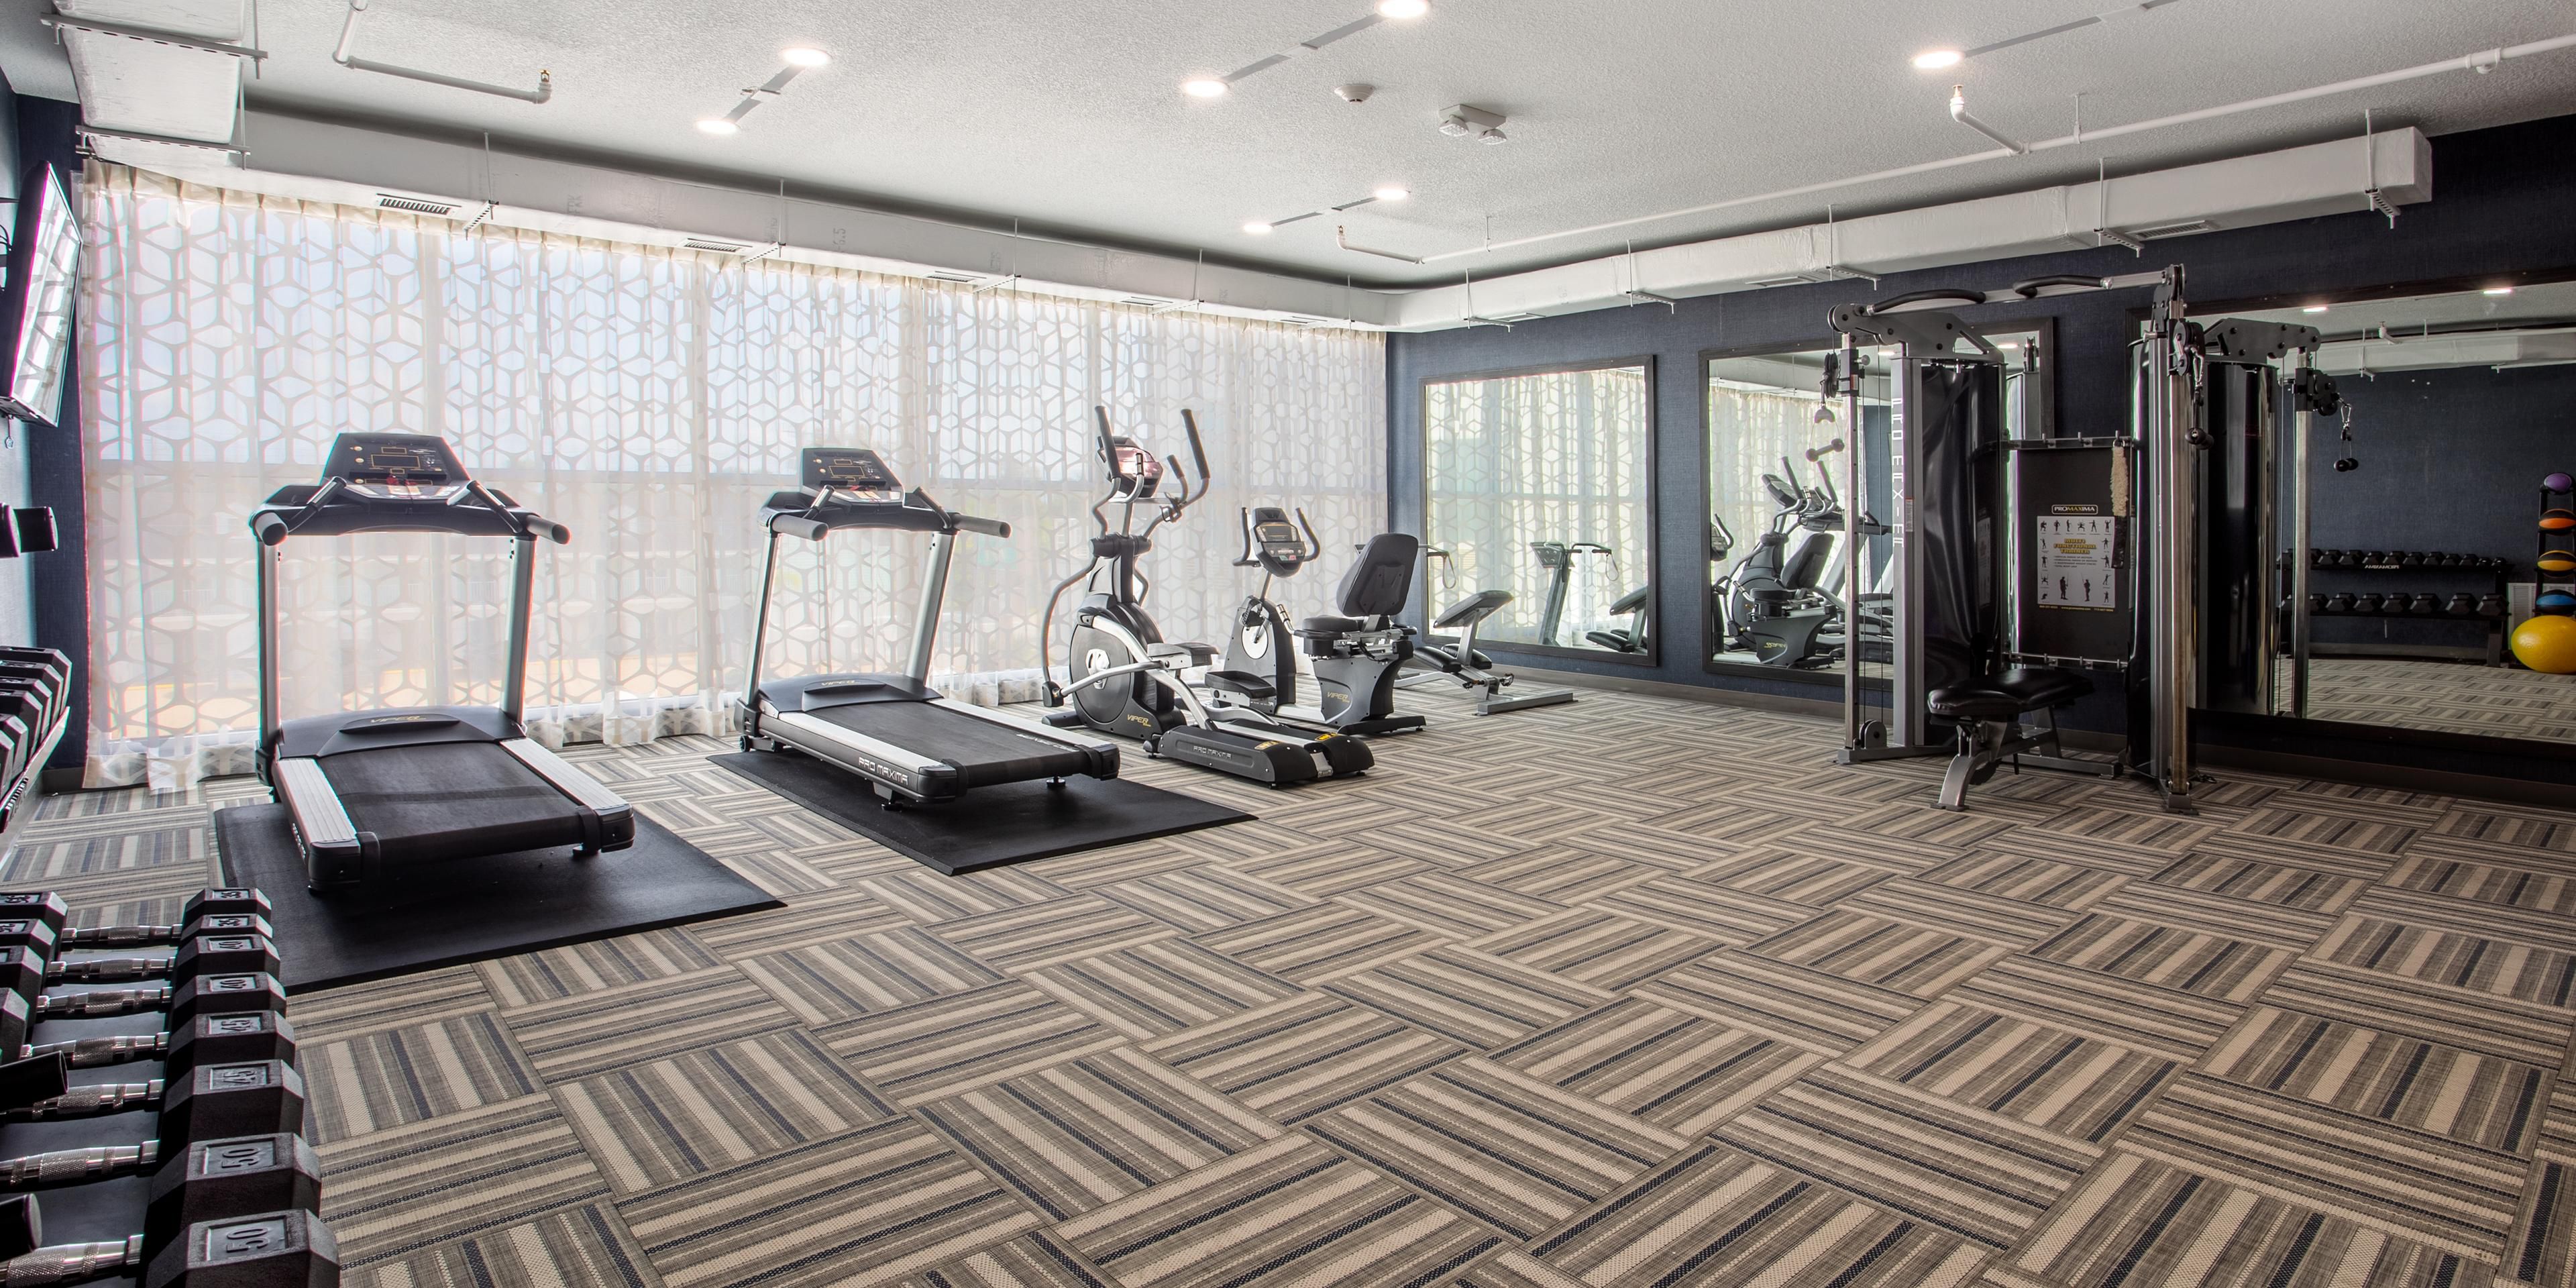 Enjoy a great workout at our spacious fitness center.